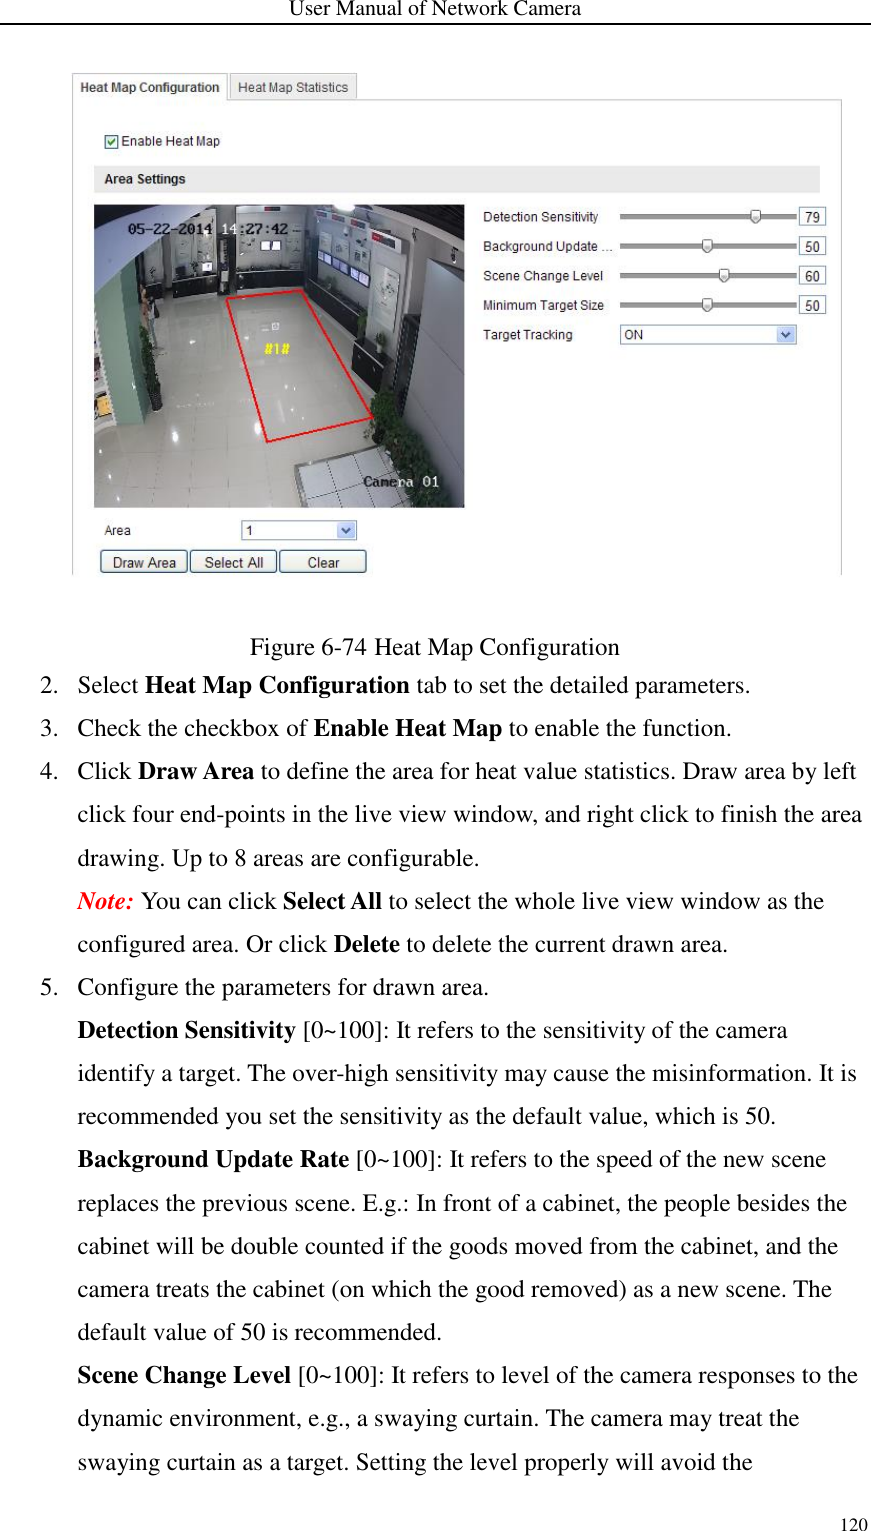 User Manual of Network Camera 120   Figure 6-74 Heat Map Configuration 2. Select Heat Map Configuration tab to set the detailed parameters. 3. Check the checkbox of Enable Heat Map to enable the function. 4. Click Draw Area to define the area for heat value statistics. Draw area by left click four end-points in the live view window, and right click to finish the area drawing. Up to 8 areas are configurable. Note: You can click Select All to select the whole live view window as the configured area. Or click Delete to delete the current drawn area. 5. Configure the parameters for drawn area. Detection Sensitivity [0~100]: It refers to the sensitivity of the camera identify a target. The over-high sensitivity may cause the misinformation. It is recommended you set the sensitivity as the default value, which is 50. Background Update Rate [0~100]: It refers to the speed of the new scene replaces the previous scene. E.g.: In front of a cabinet, the people besides the cabinet will be double counted if the goods moved from the cabinet, and the camera treats the cabinet (on which the good removed) as a new scene. The default value of 50 is recommended. Scene Change Level [0~100]: It refers to level of the camera responses to the dynamic environment, e.g., a swaying curtain. The camera may treat the swaying curtain as a target. Setting the level properly will avoid the 